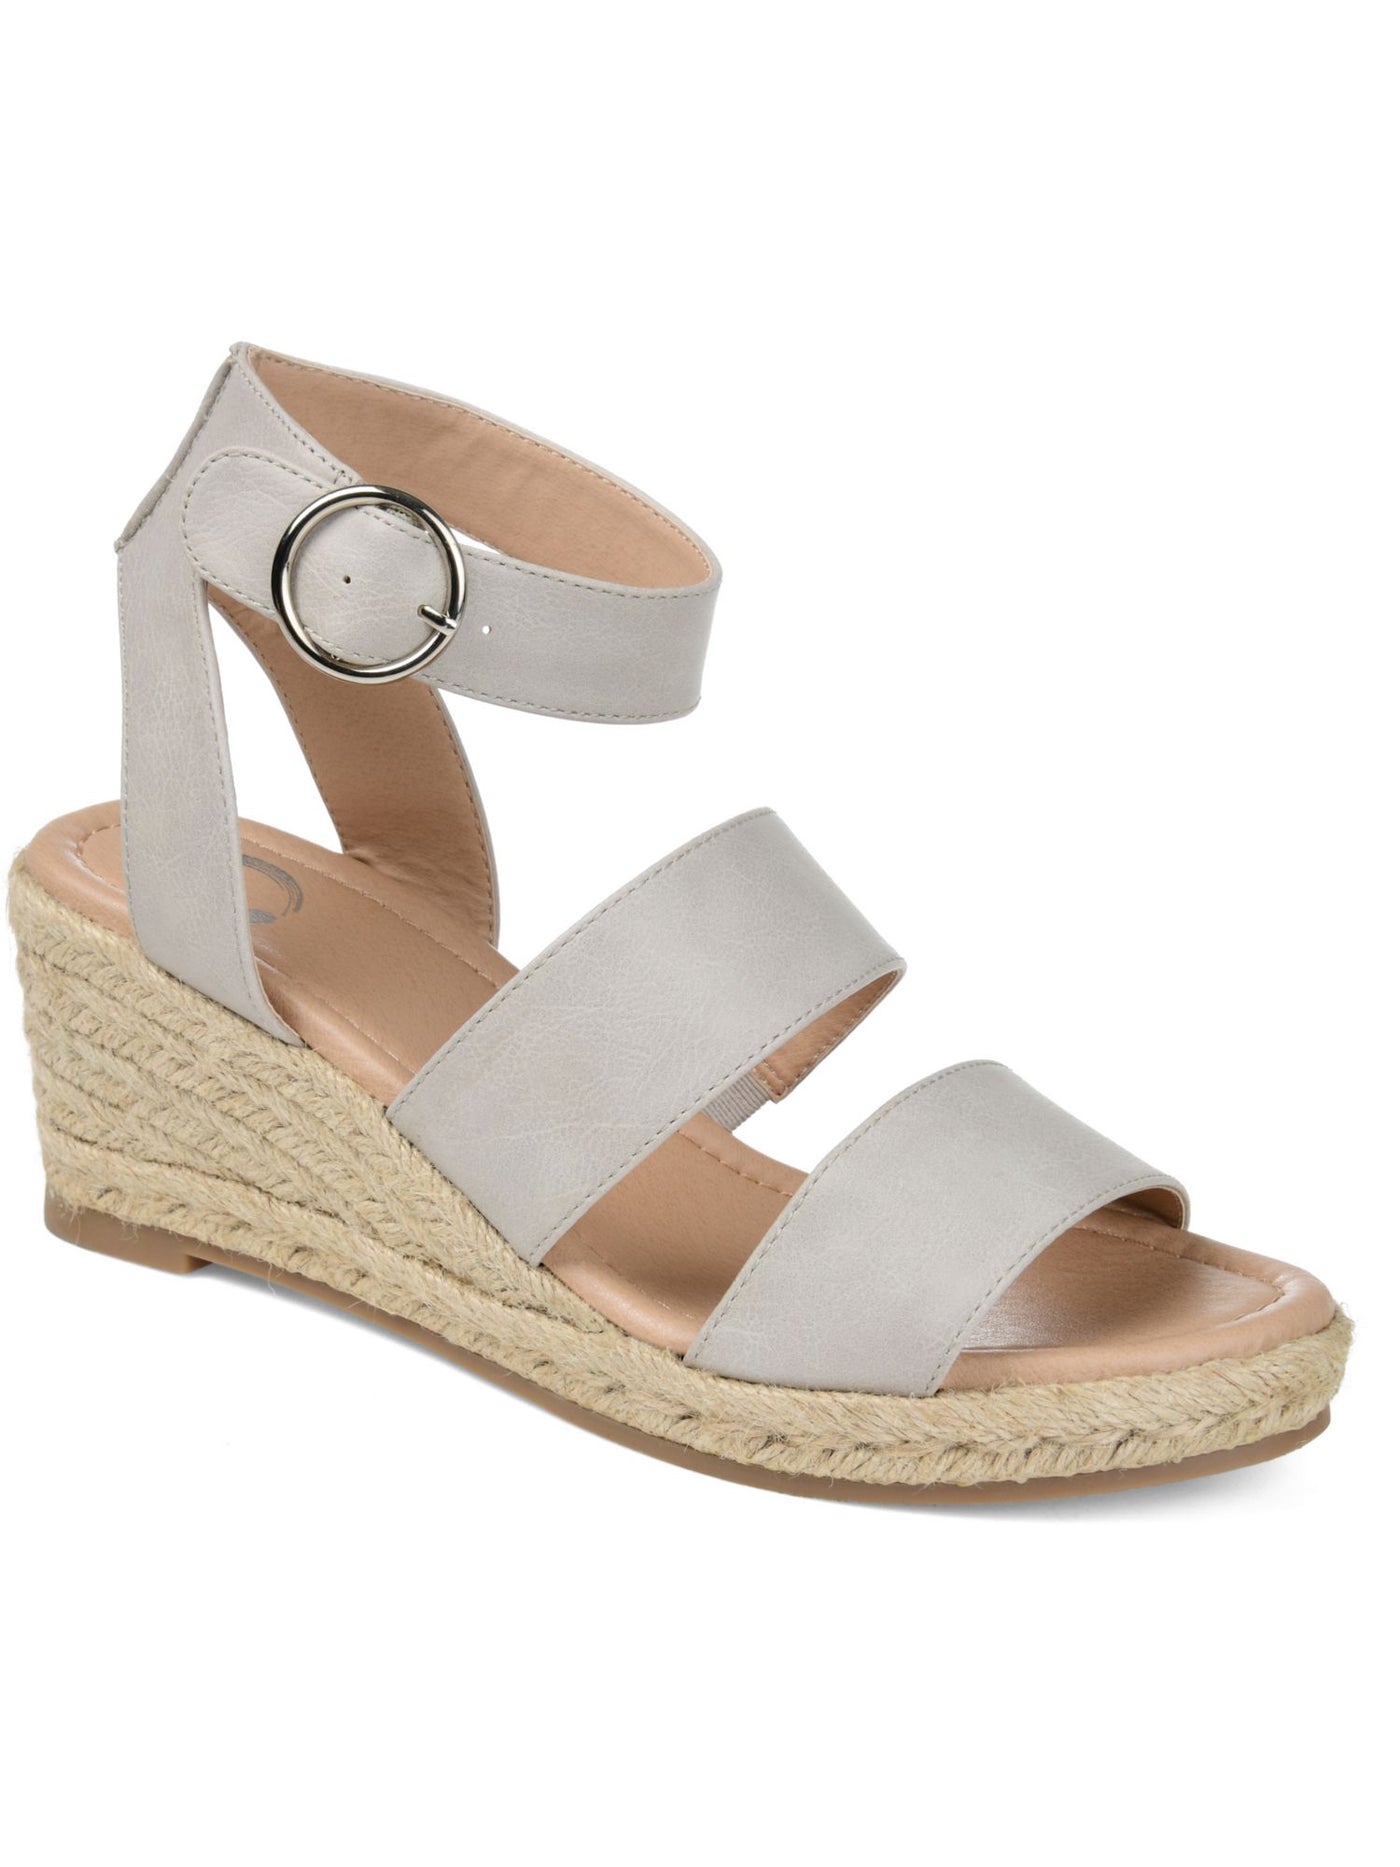 JOURNEE COLLECTION Womens White Adjustable Strap Strappy Norra Open Toe Wedge Buckle Espadrille Shoes 7.5